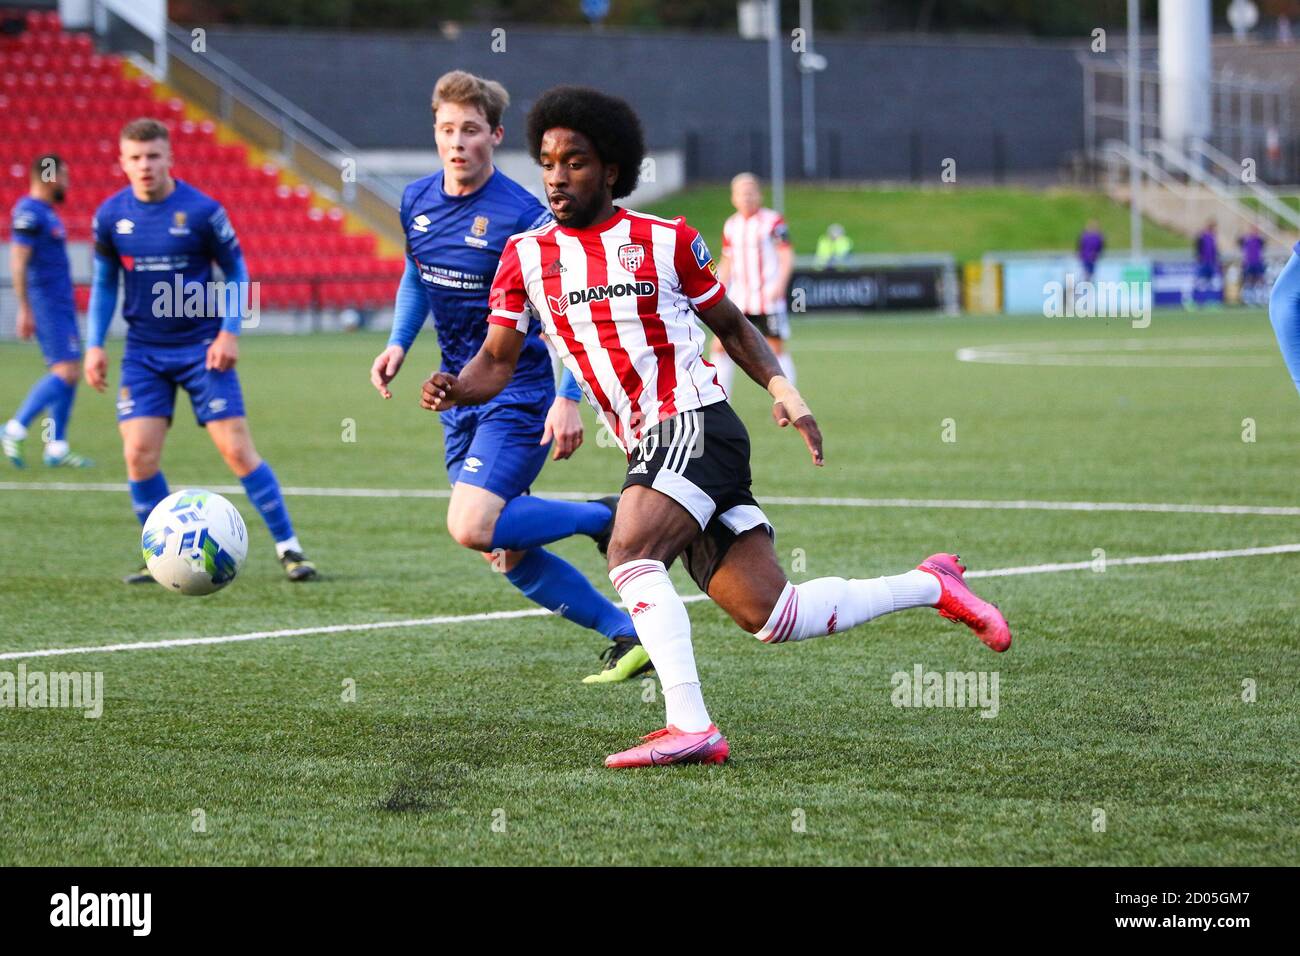 WALTER FIGUEIRA (Derry City FC)  during the Airtricity League fixture between Derry City & Waterford 02-10-2020 Photo by Kevin Moore/Maiden City Image Stock Photo